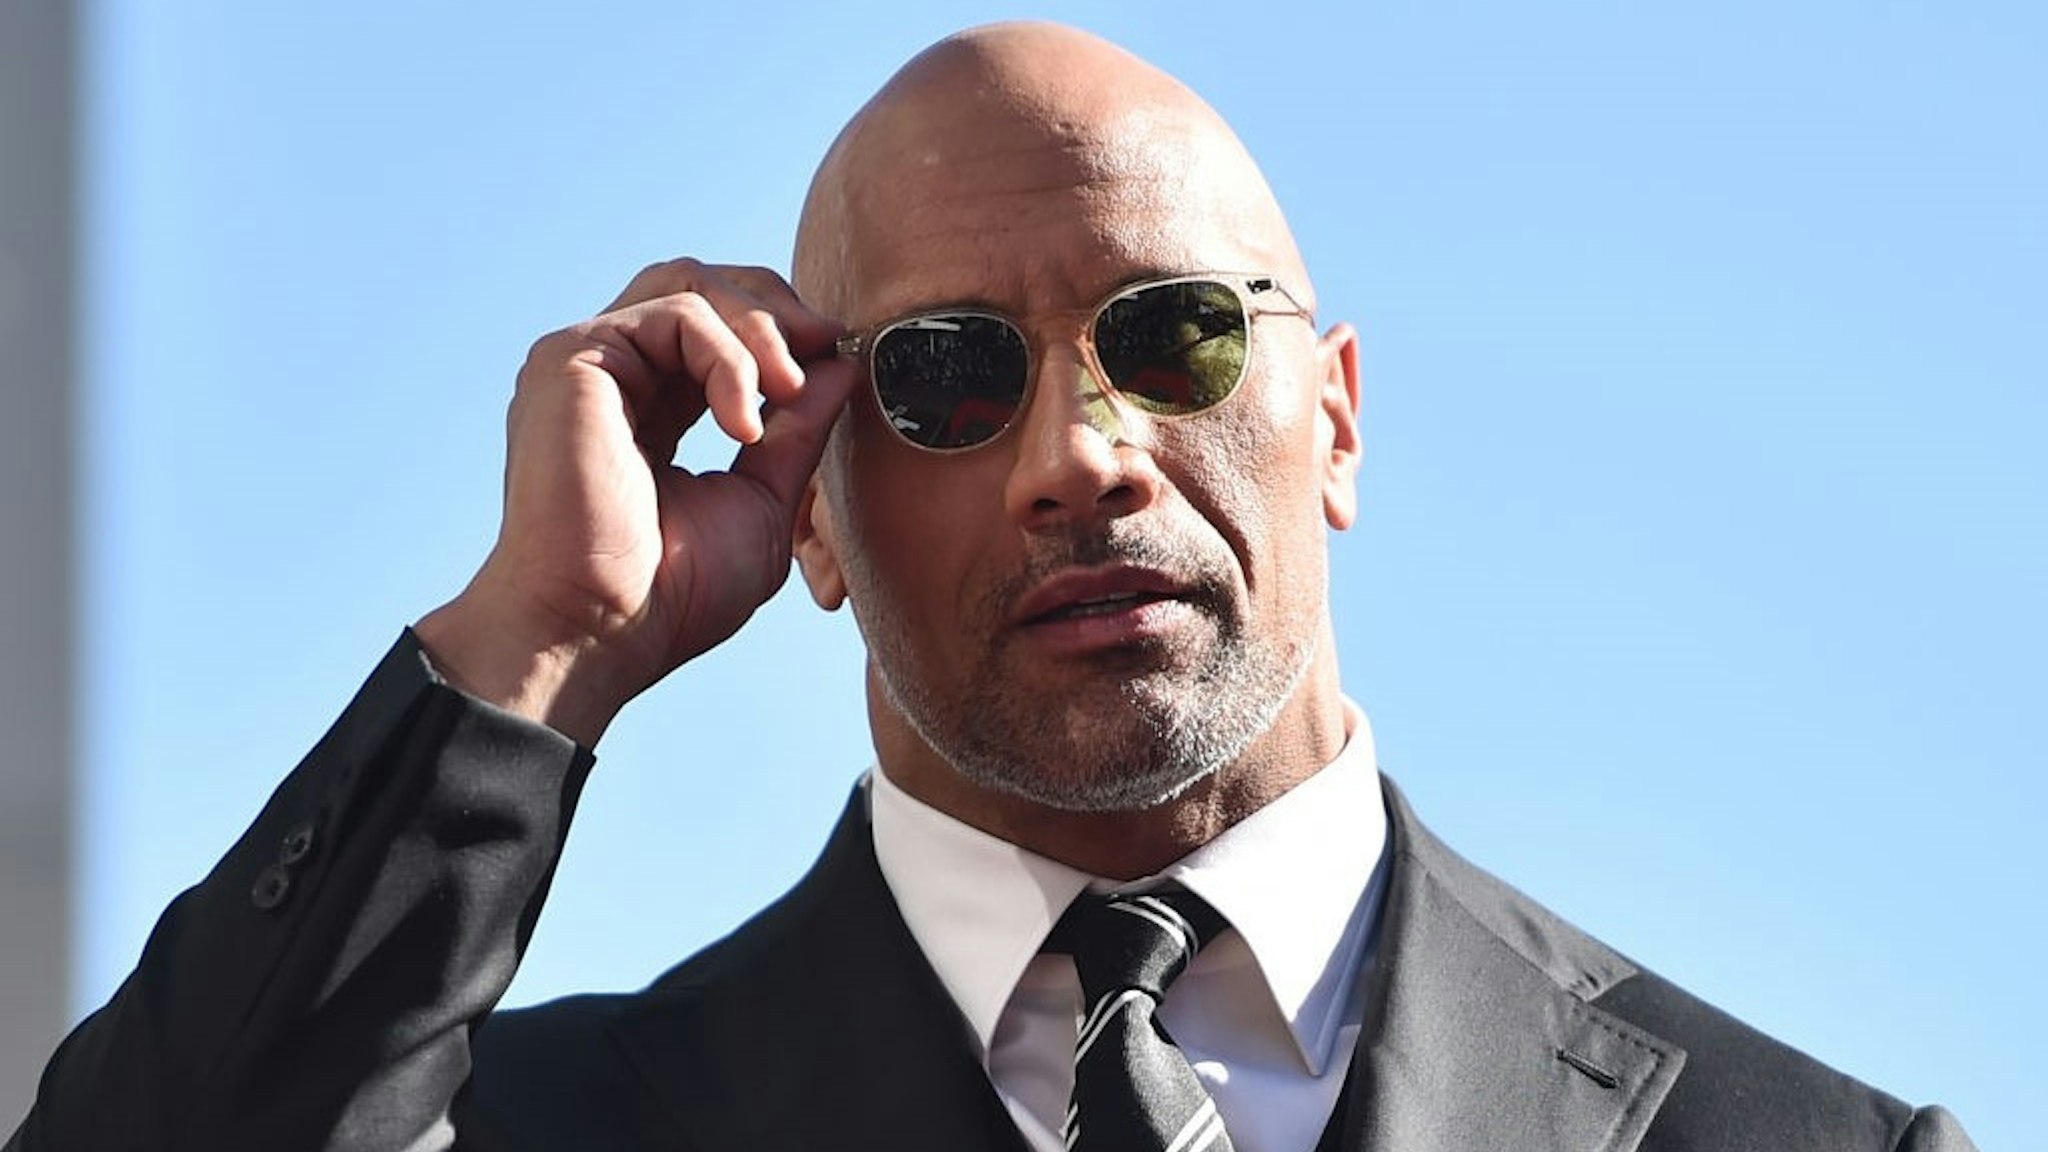 HOLLYWOOD, CA - DECEMBER 13: Actor Dwayne Johnson attends a ceremony honoring him with the 2,624th star on the Hollywood Walk of Fame on December 13, 2017 in Hollywood, California. (Photo by